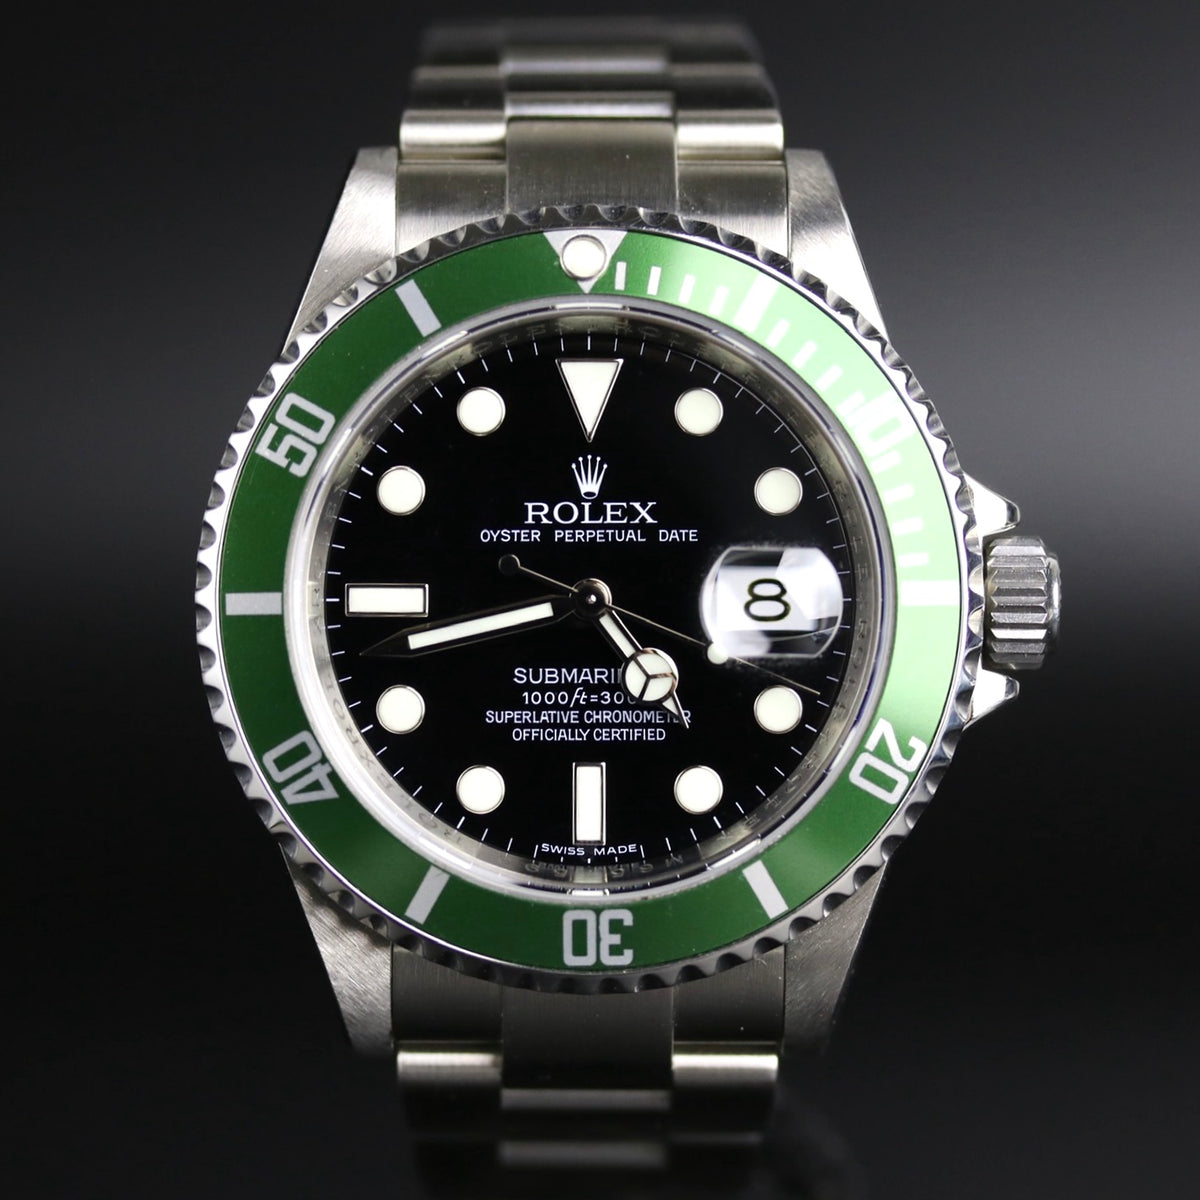 2007 Rolex 16610LV Submariner "Kermit" Inner Bezel Engraved with Box & Papers